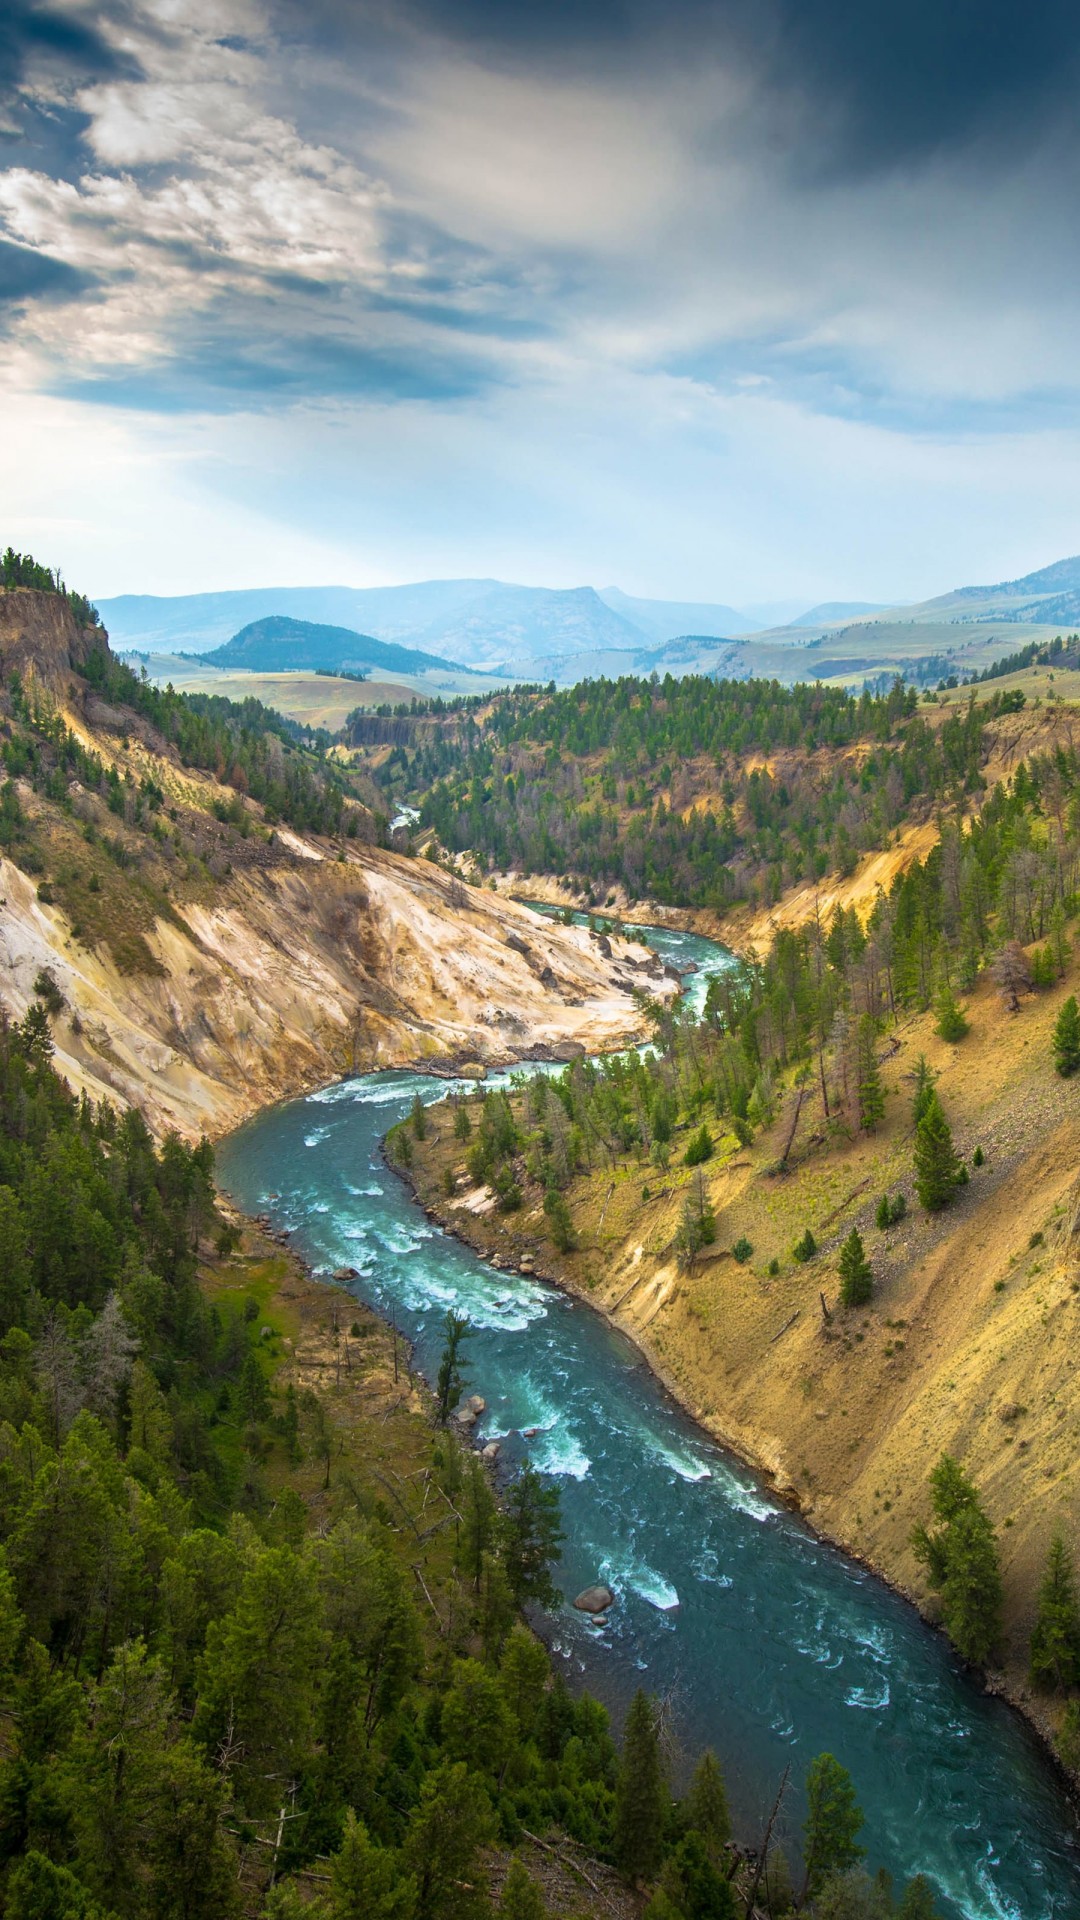 The River, Grand Canyon of Yellowstone National Park, USA Wallpaper for SONY Xperia Z3